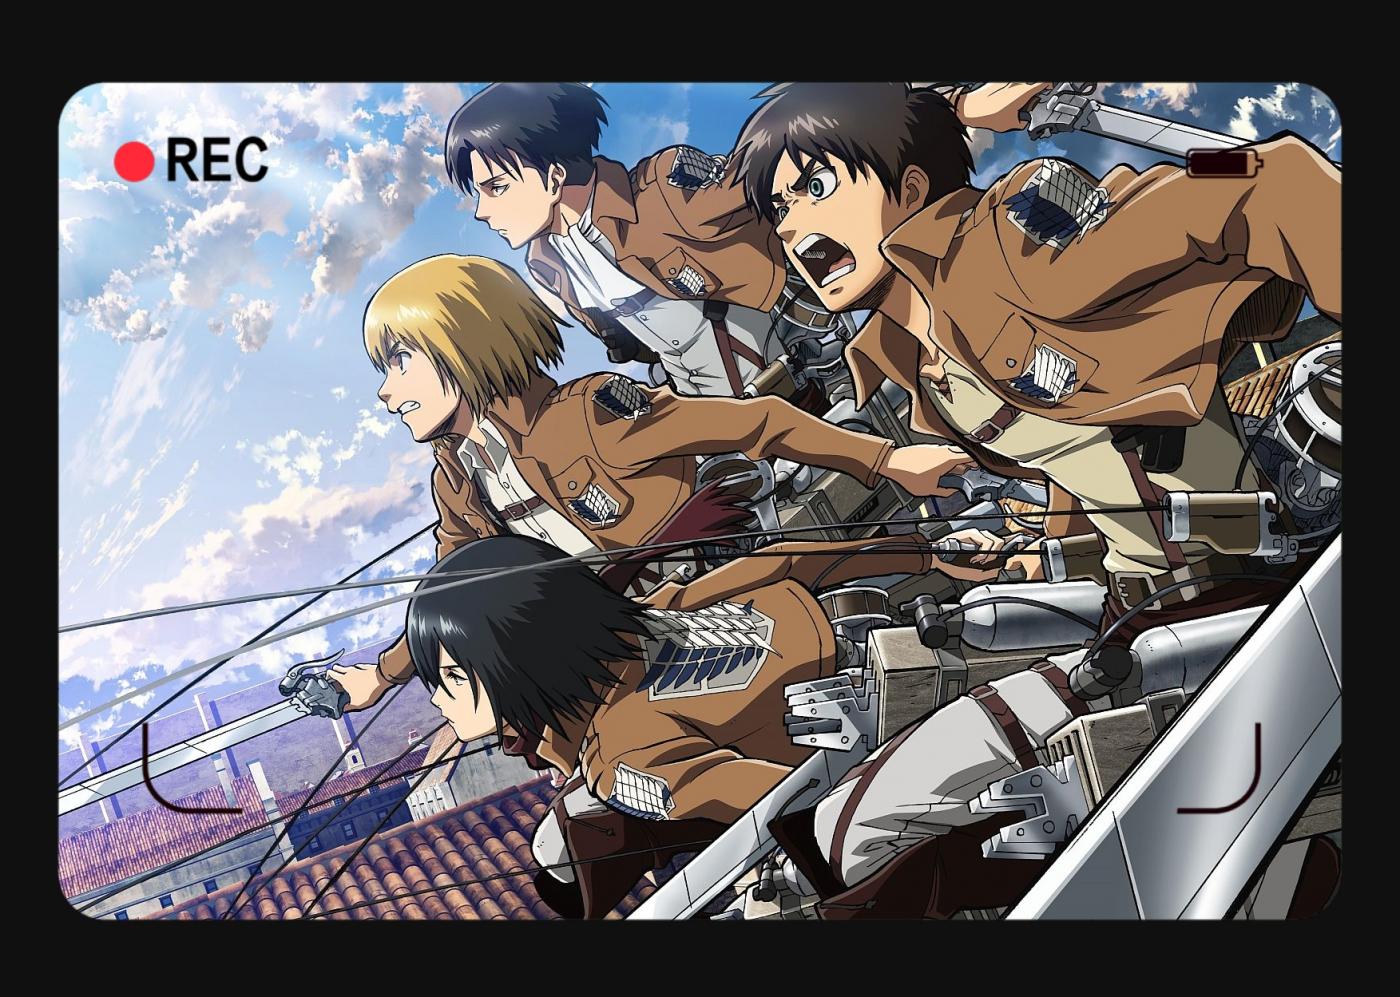 Is Attack on Titan full series on Disney Plus, Netflix,  Prime,  Crunchyroll, or Hulu? Where to watch online, and streaming details